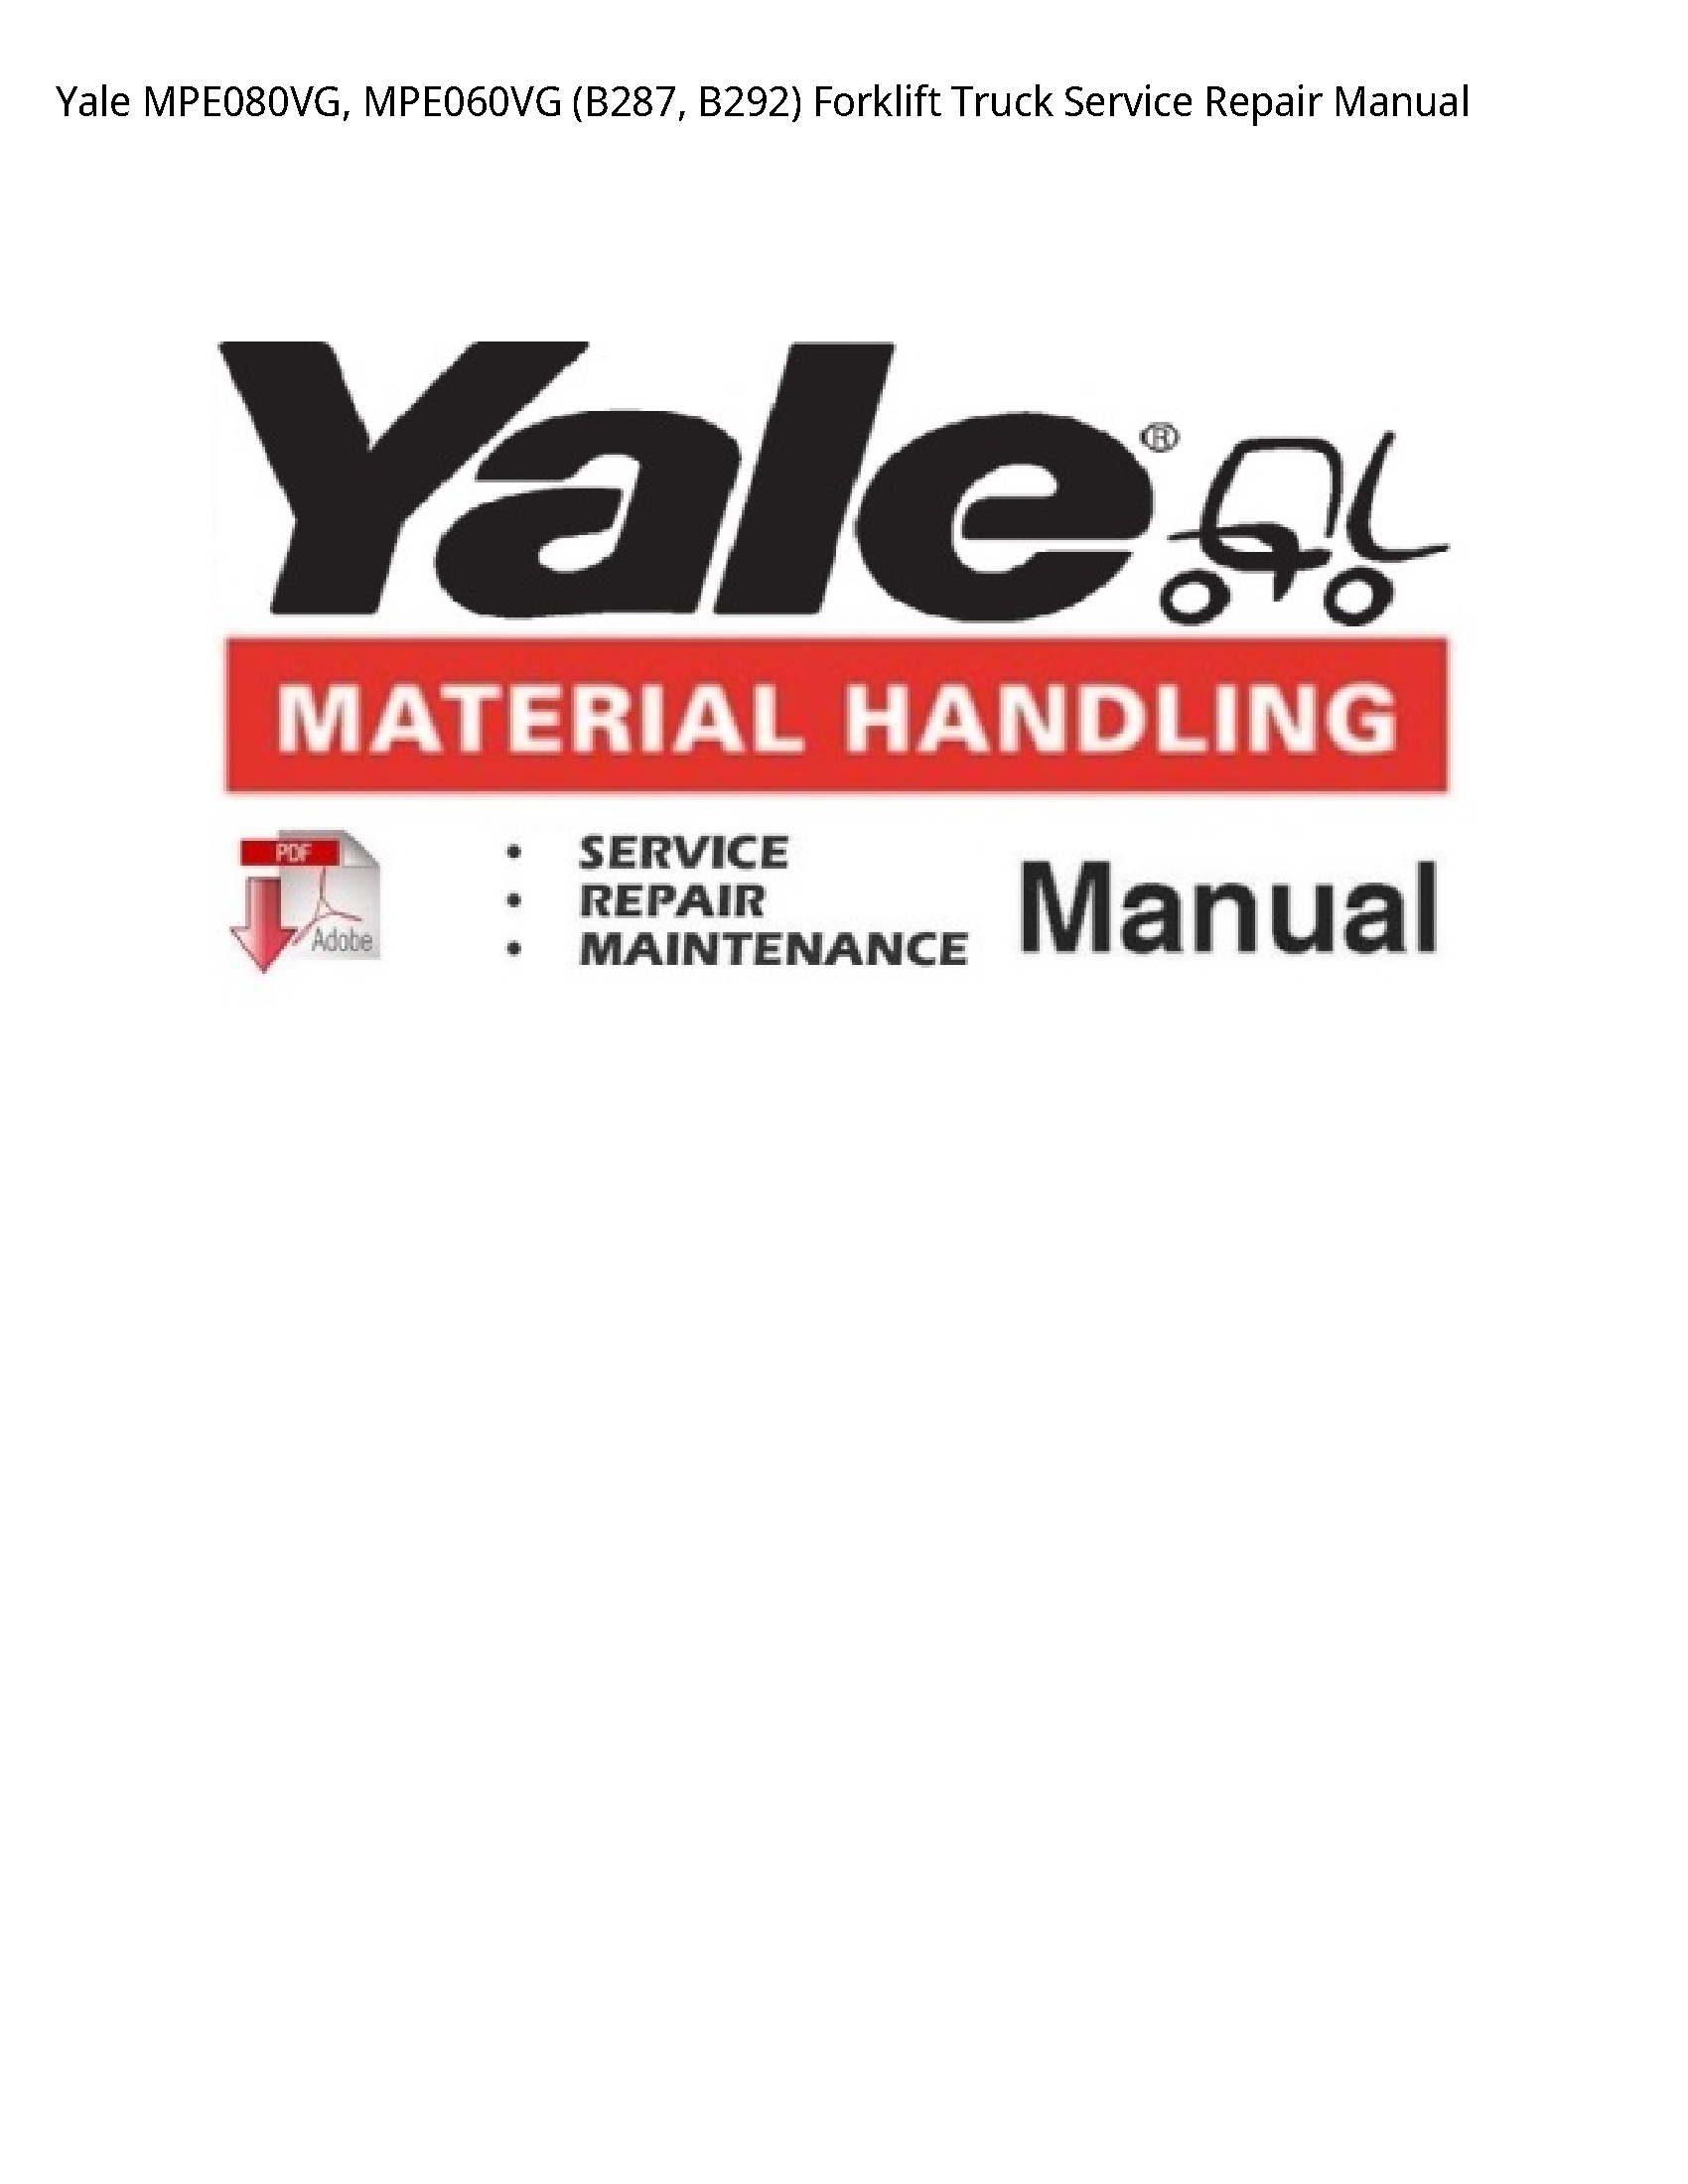 Yale MPE080VG Forklift Truck manual